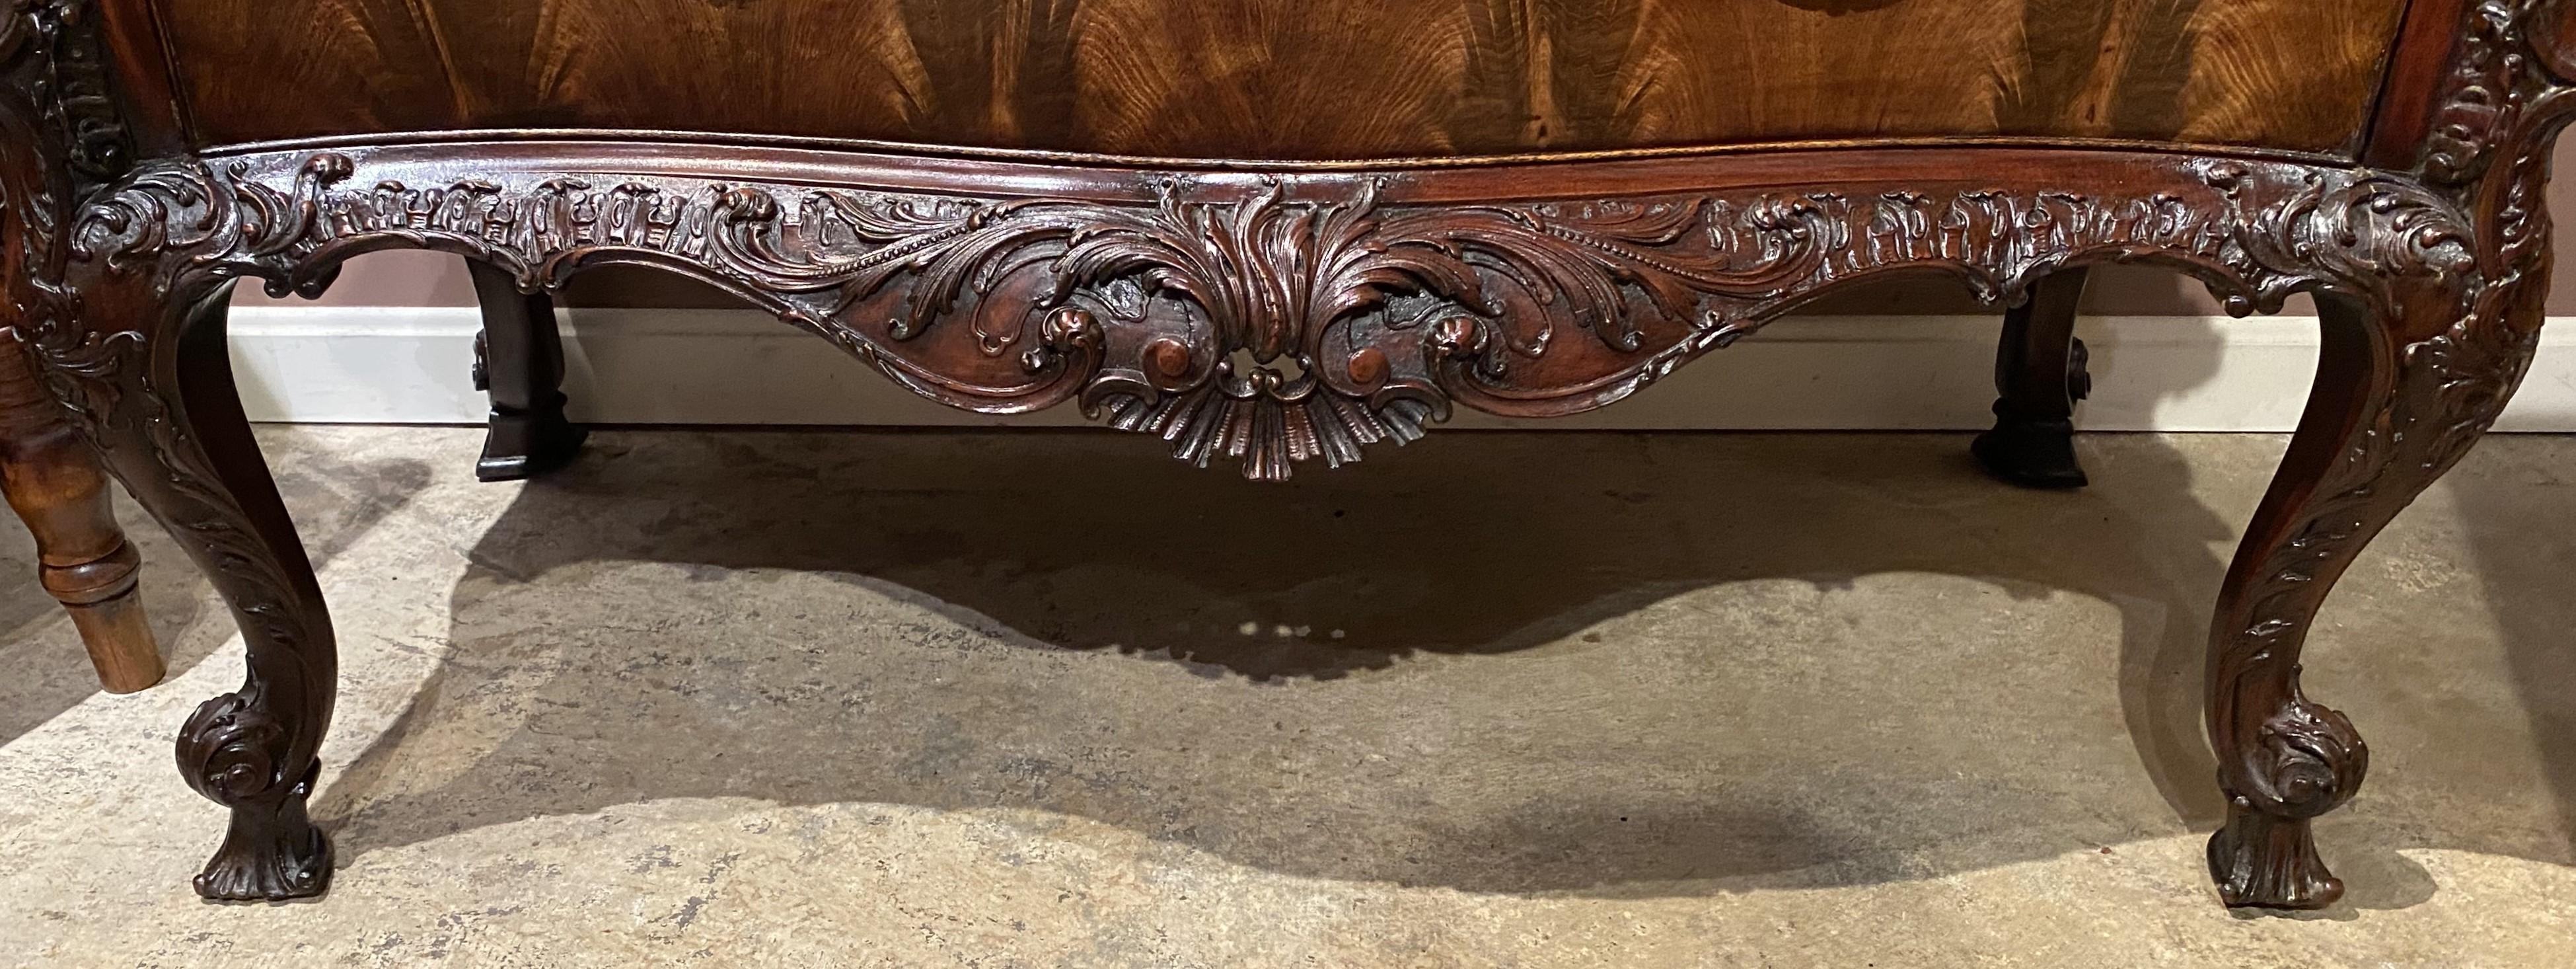 19th Century Rococo Revival Mahogany Heavily Carved 2 Drawer Commode in the Chippendale Taste For Sale